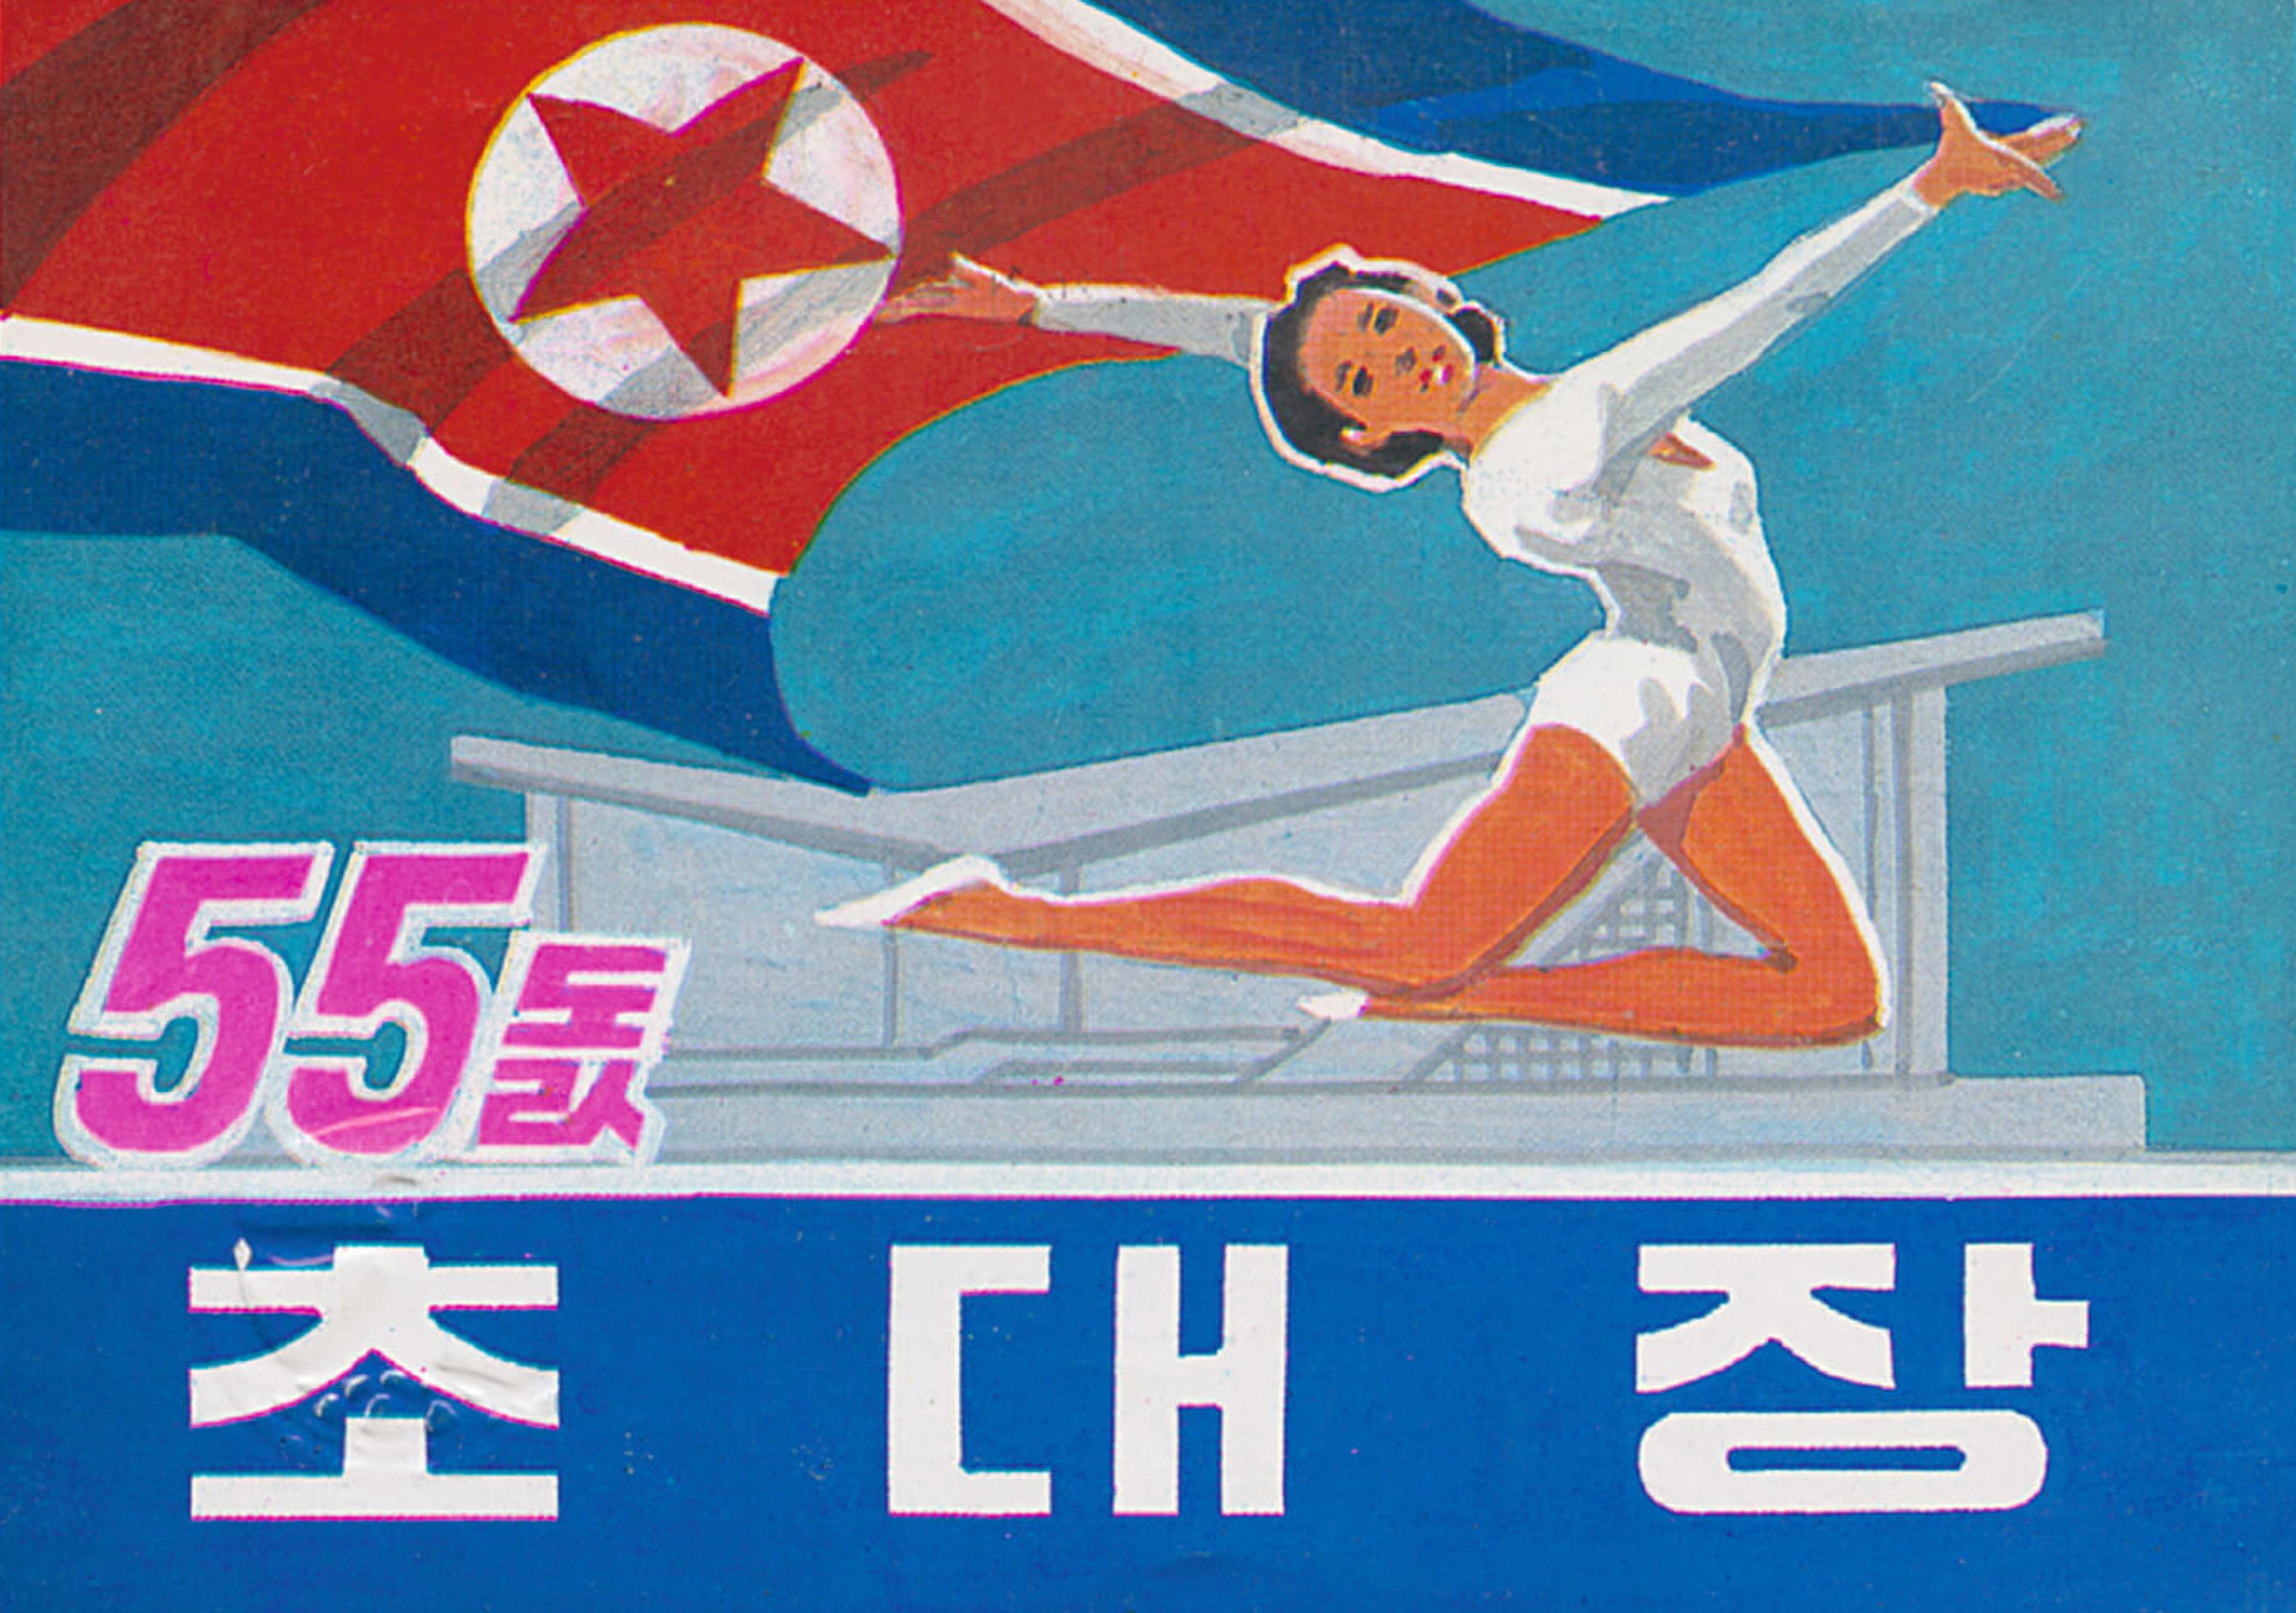 A graphic poster featuring an acrobat flying the DPRK flag